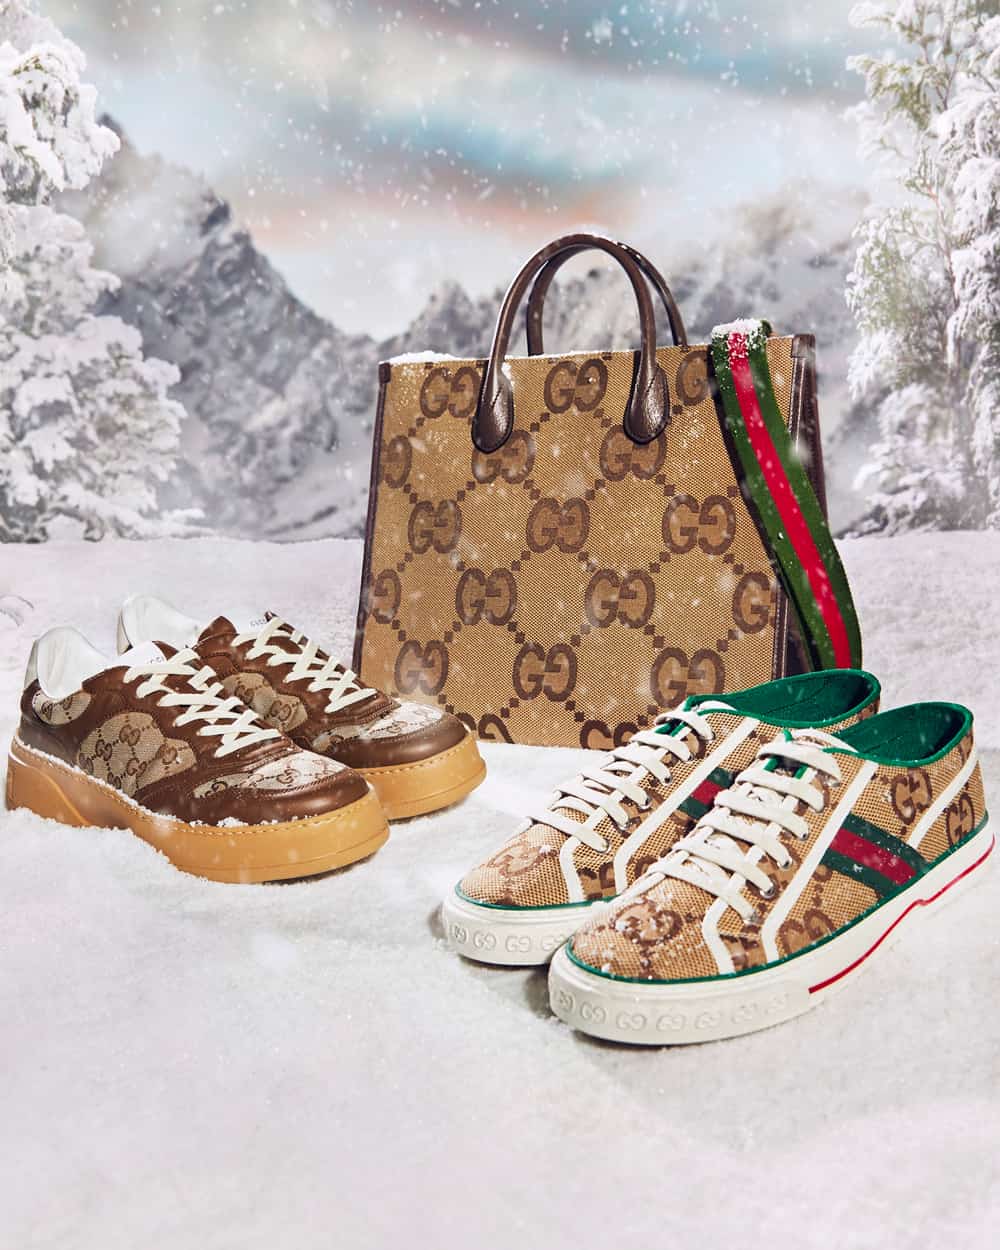 Two pairs of men's Gucci monogram sneakers in brown with matching tote bag